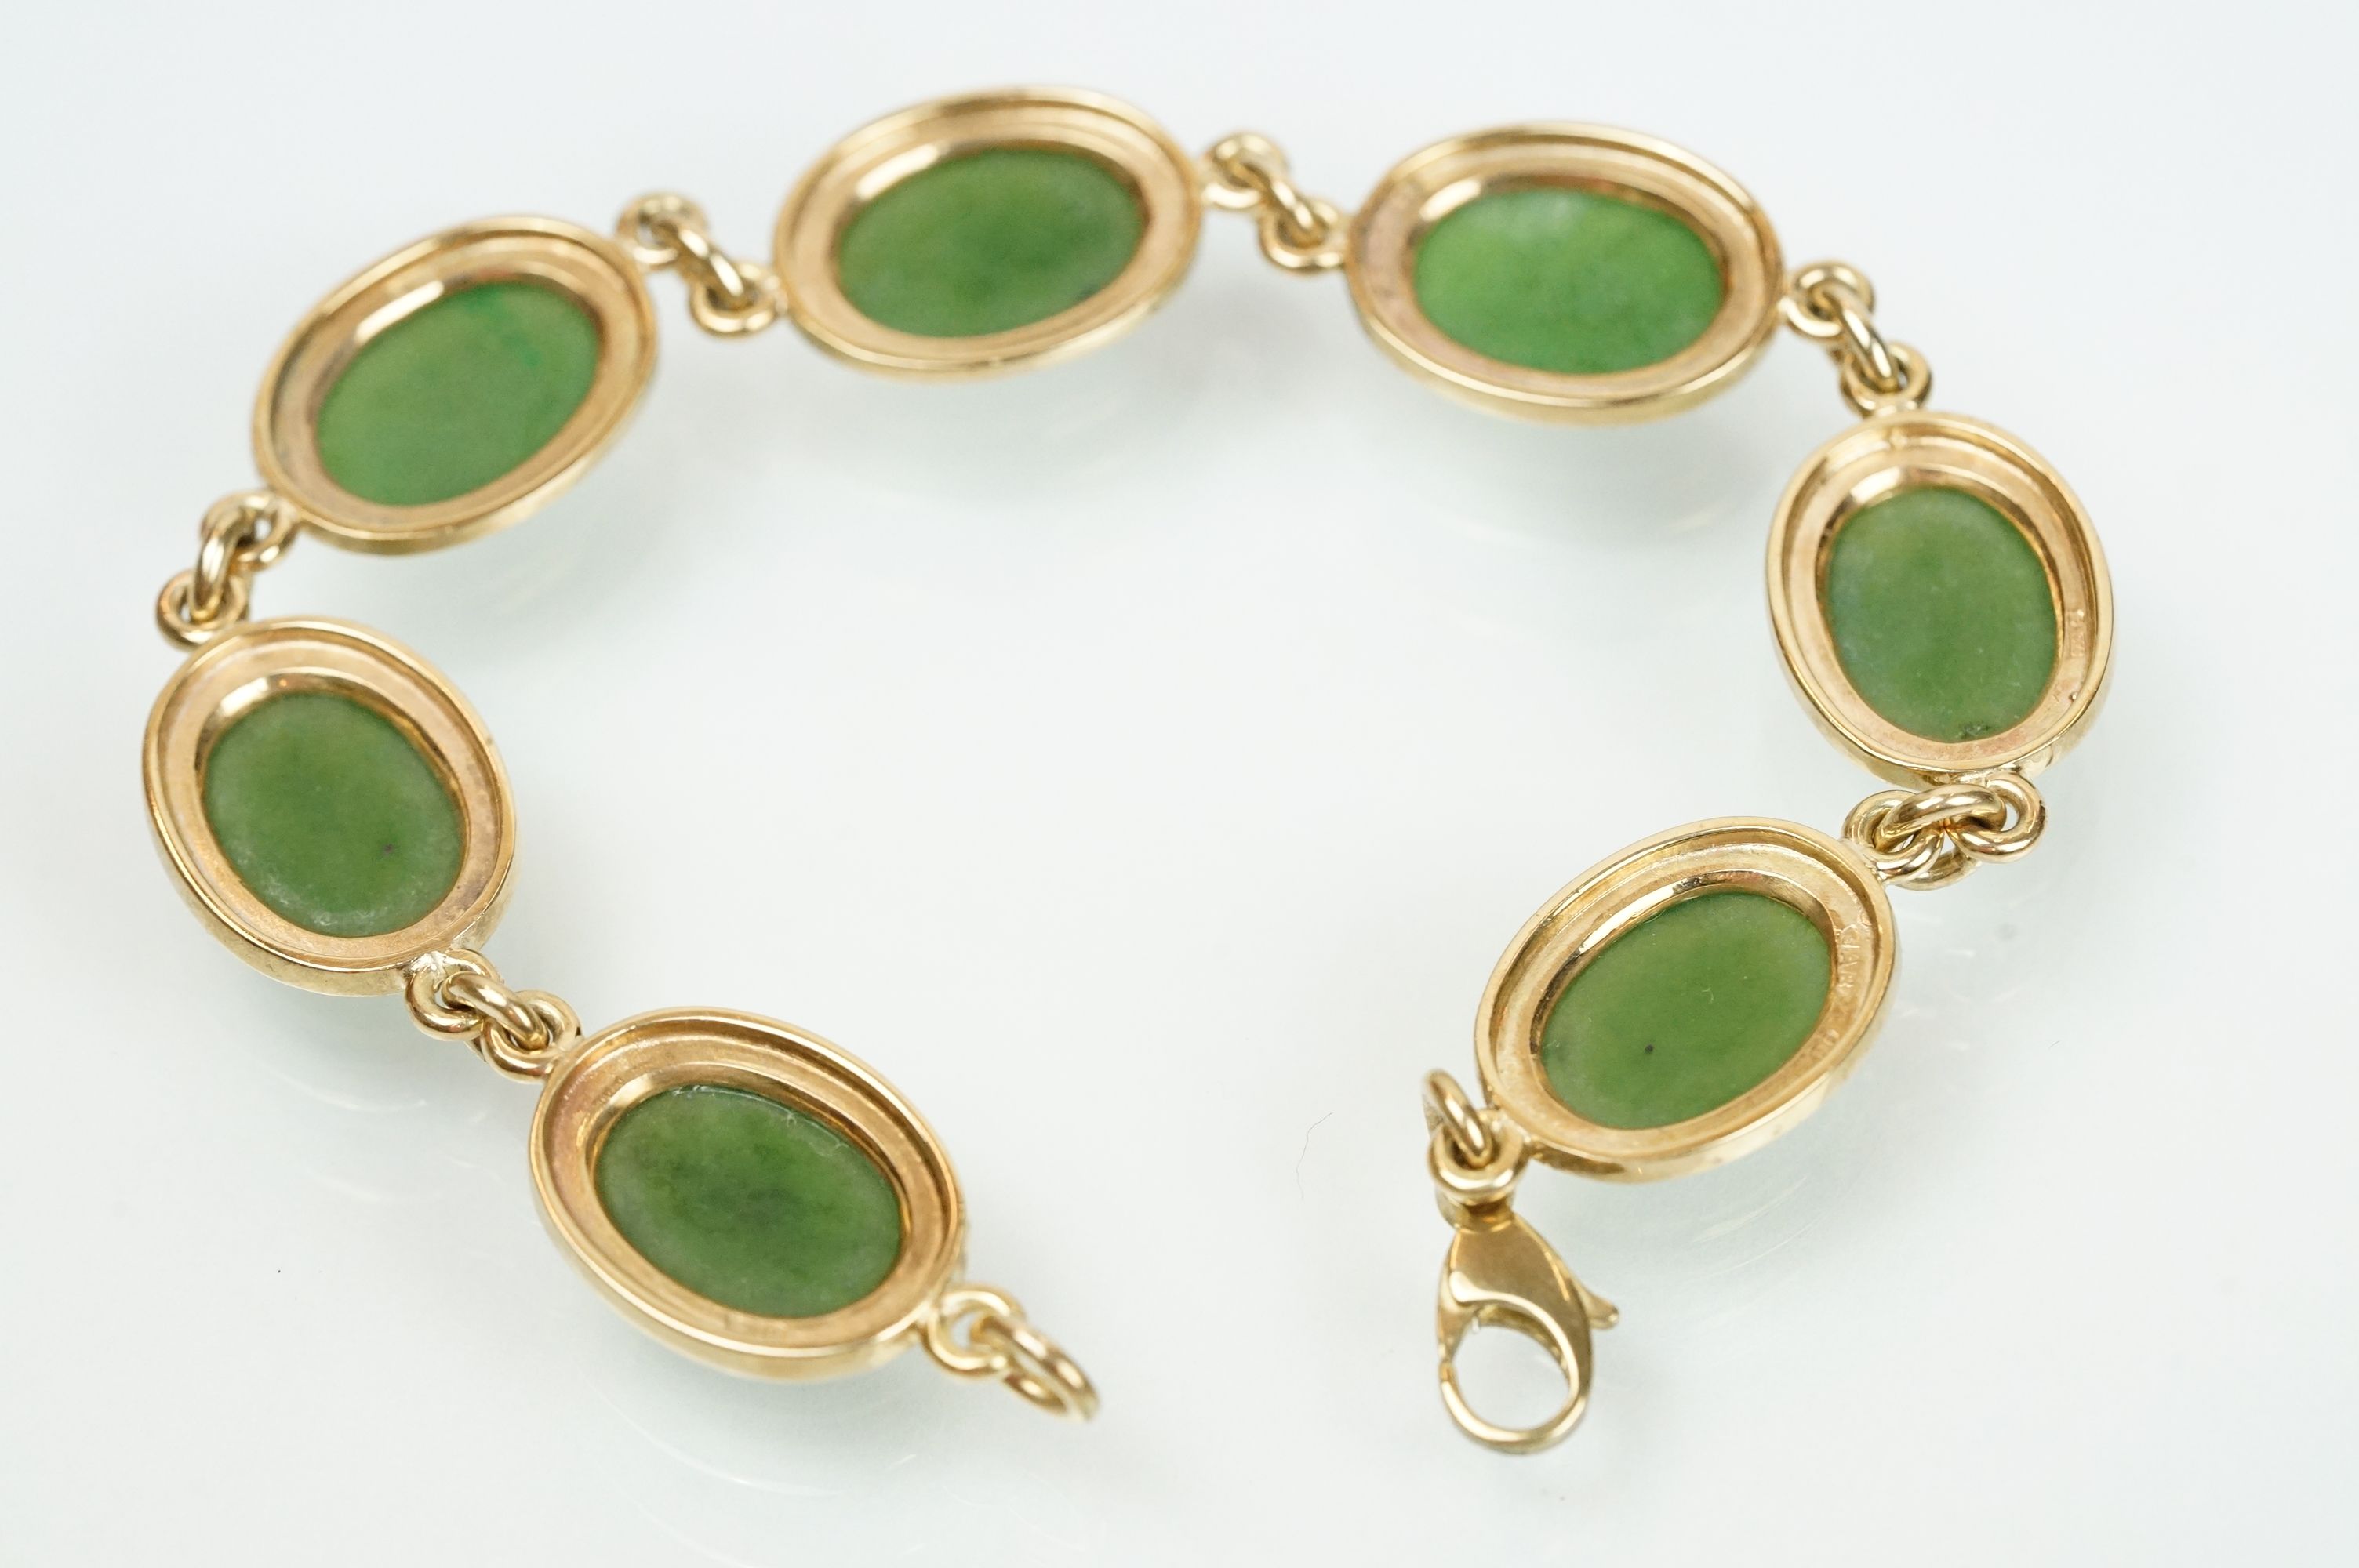 9ct gold and nephrite earrings, bracelet and pendant necklace. The bracelet set with seven - Bild 9 aus 10